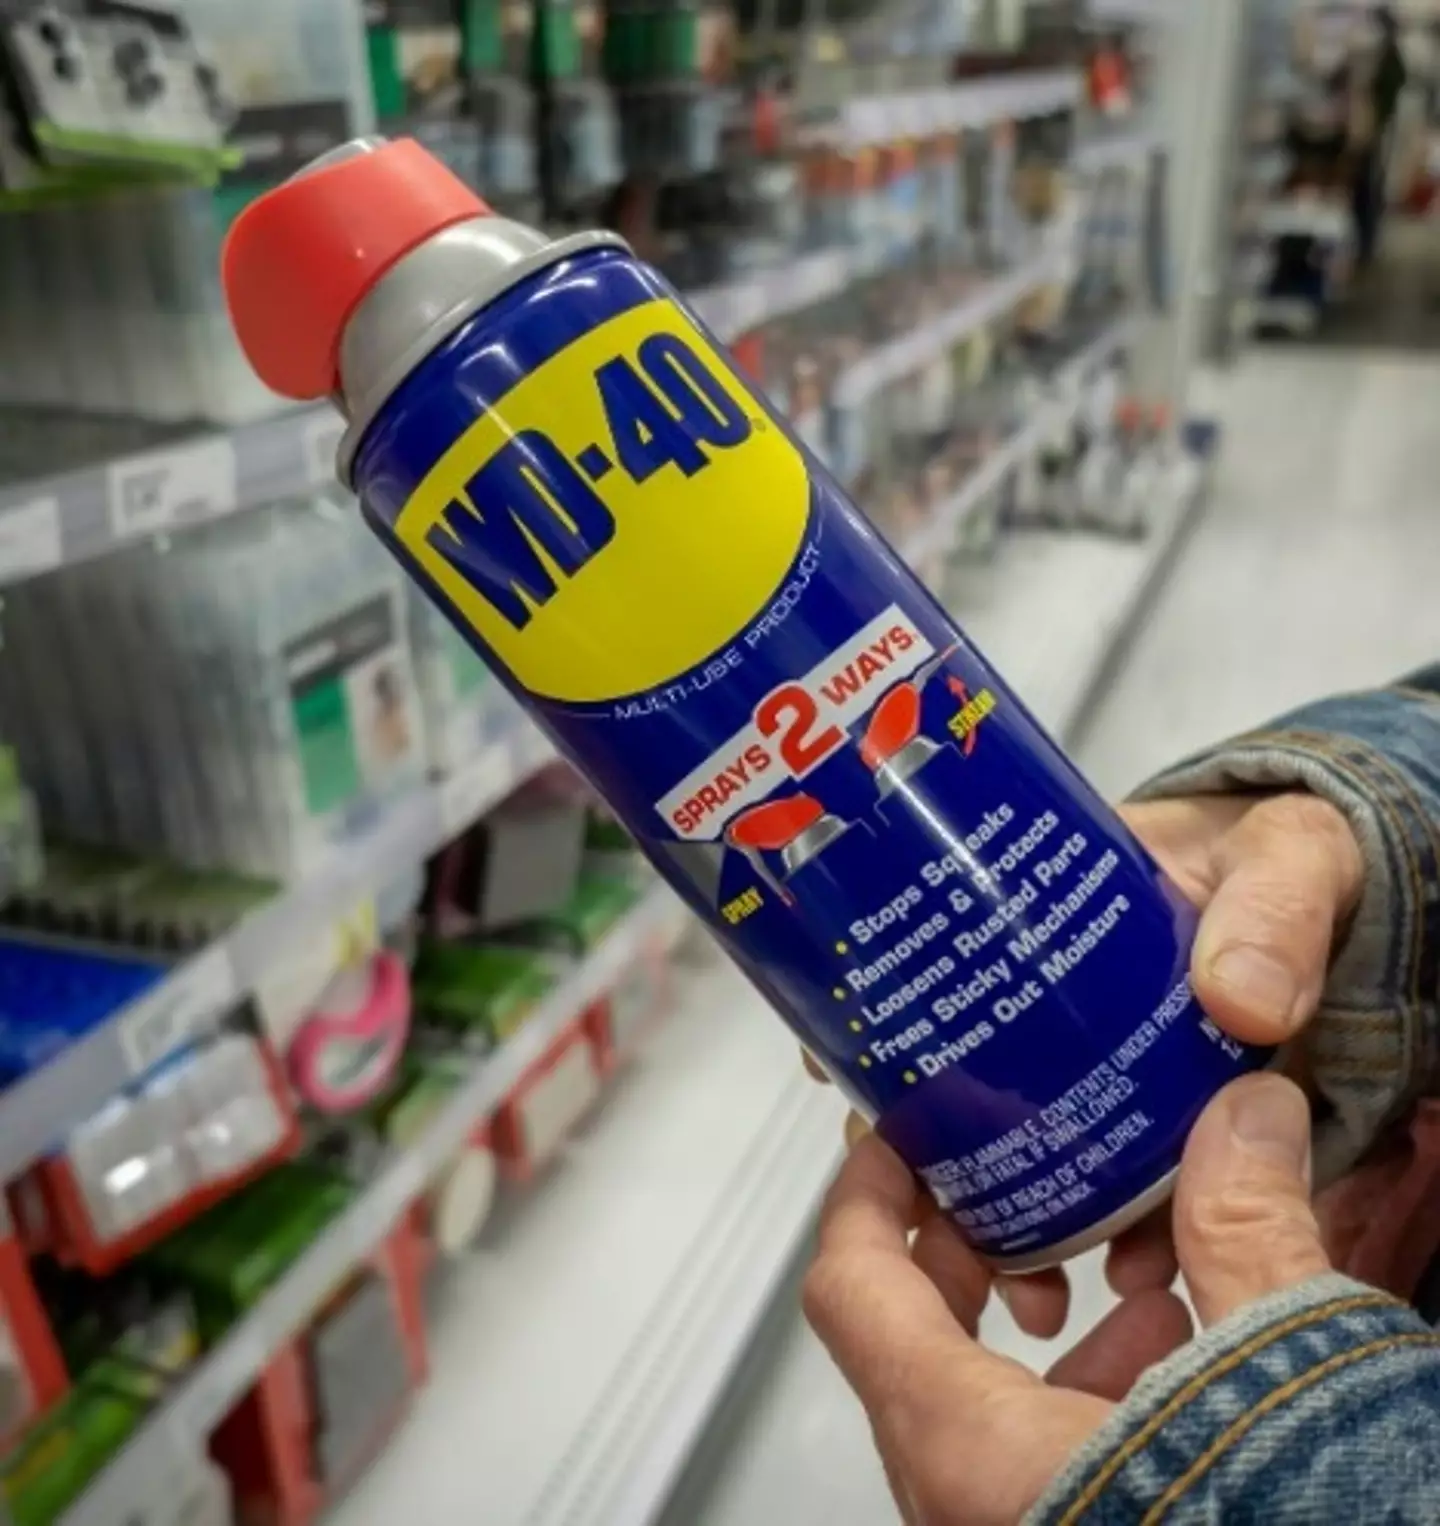 Many people realised they didn't know what WD-40 actually stood for.